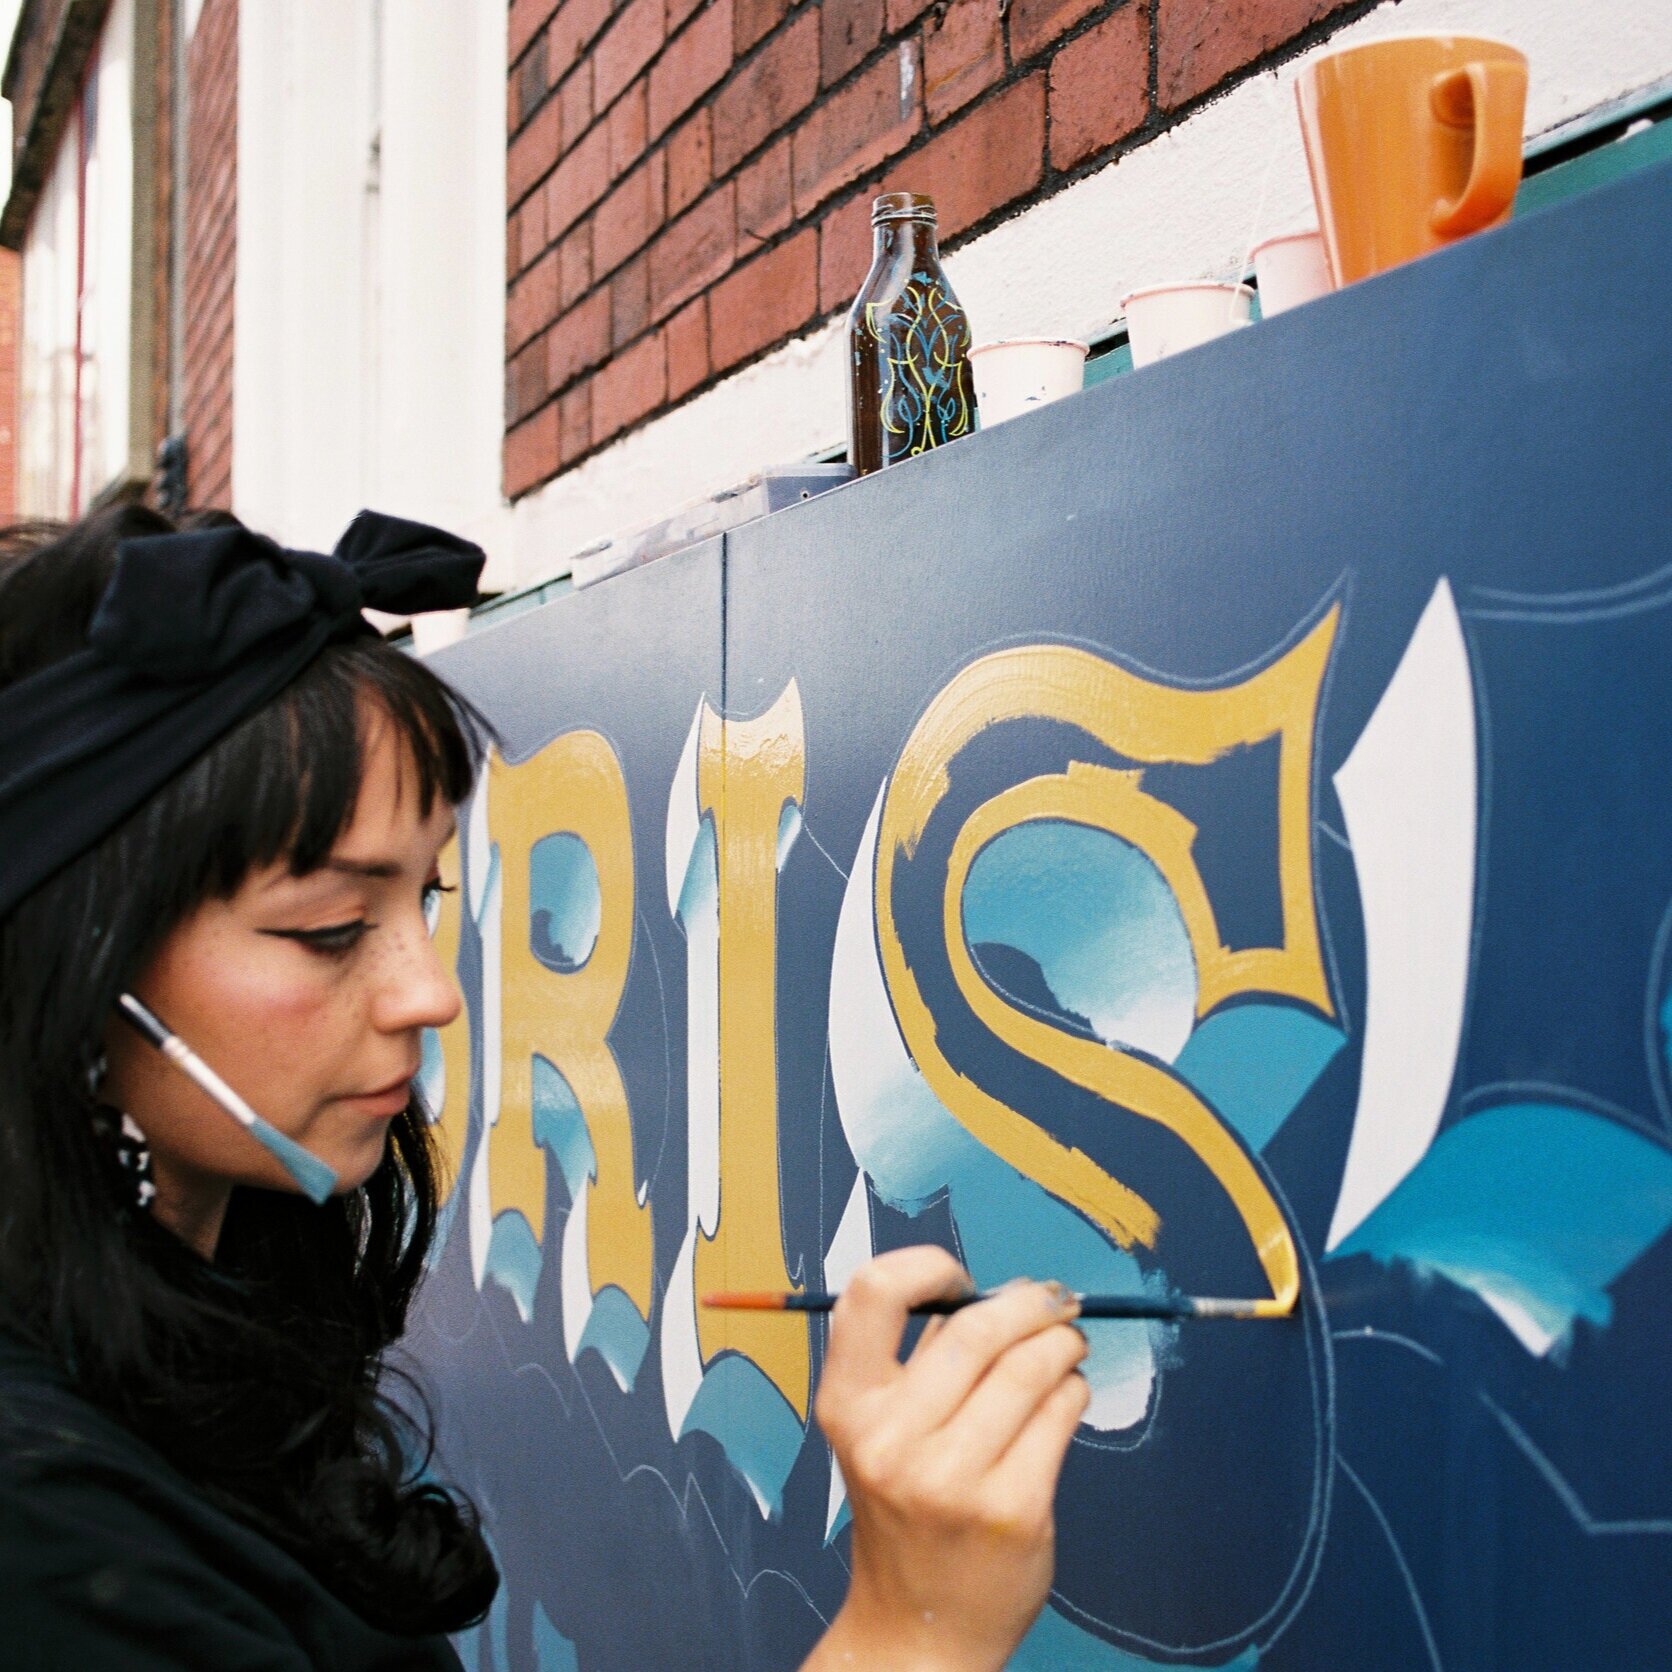 Female signwriter painting a fascia sign.